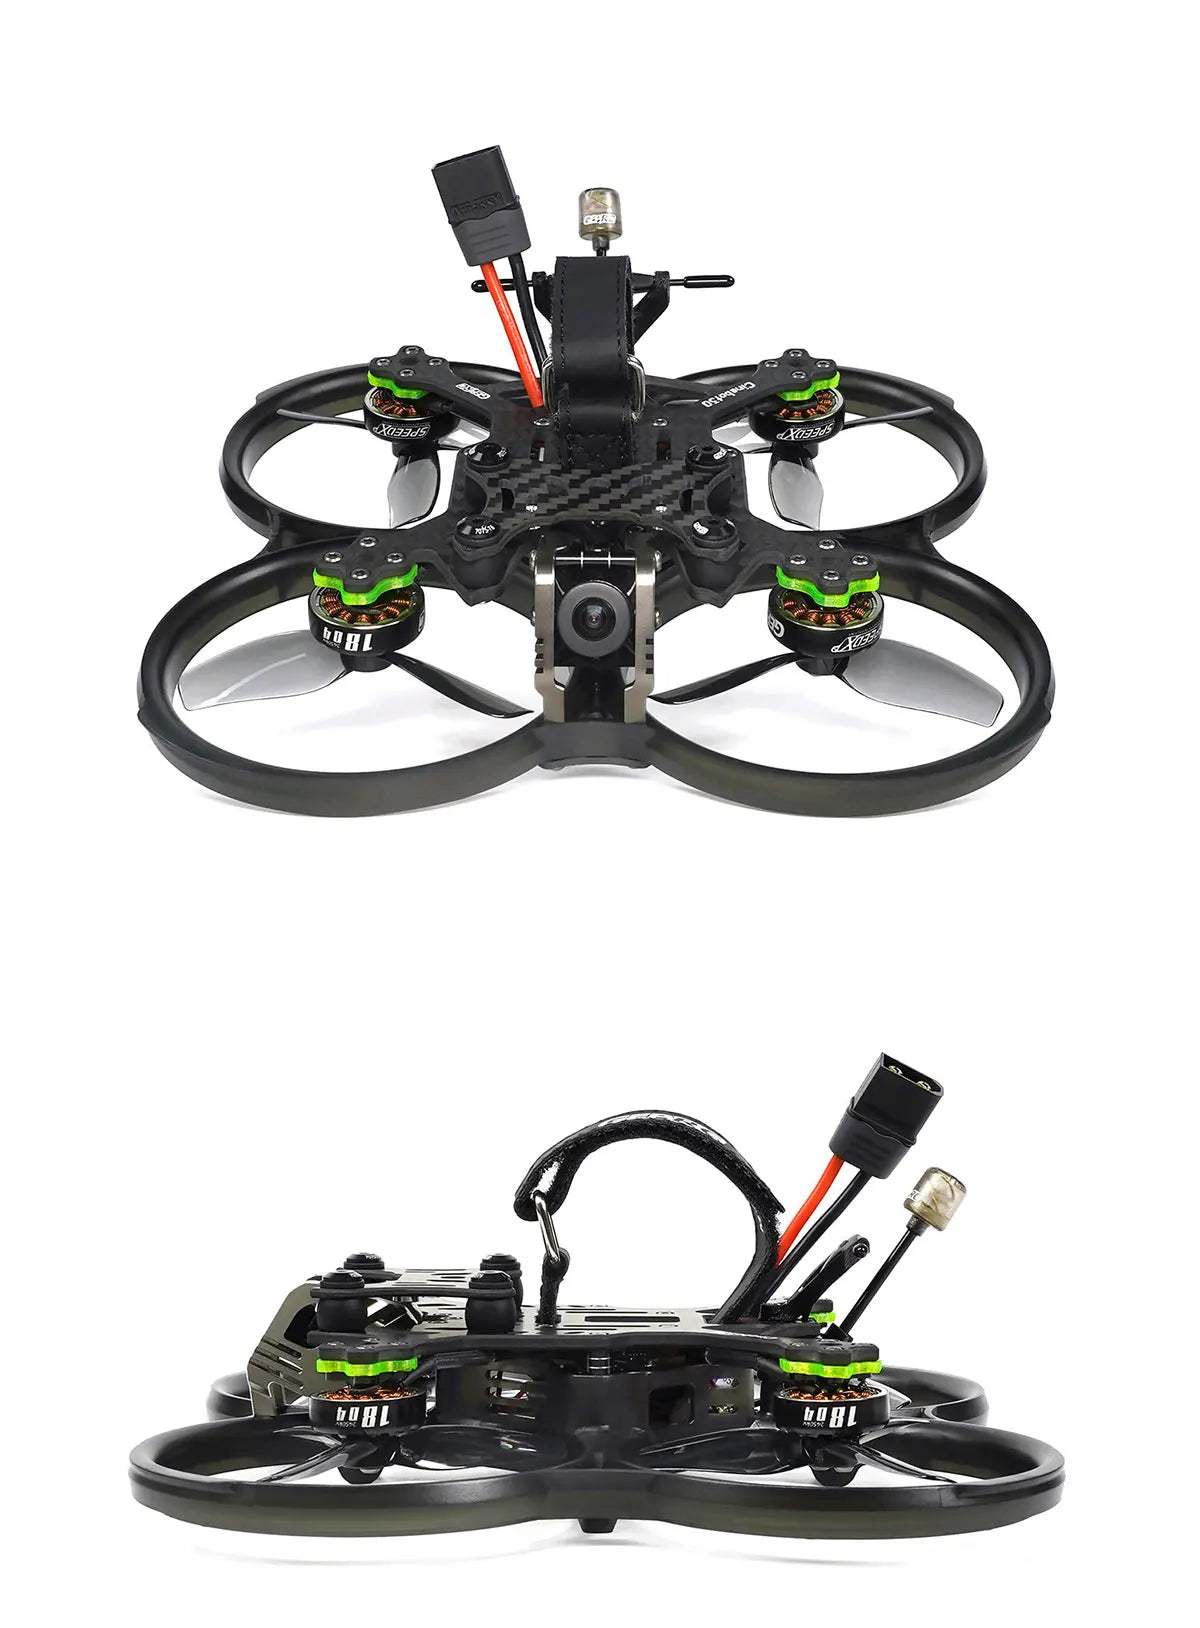 GEPRC Cinebot30 FPV Drone, Familiarize yourself with the different flight modes available on the drone .